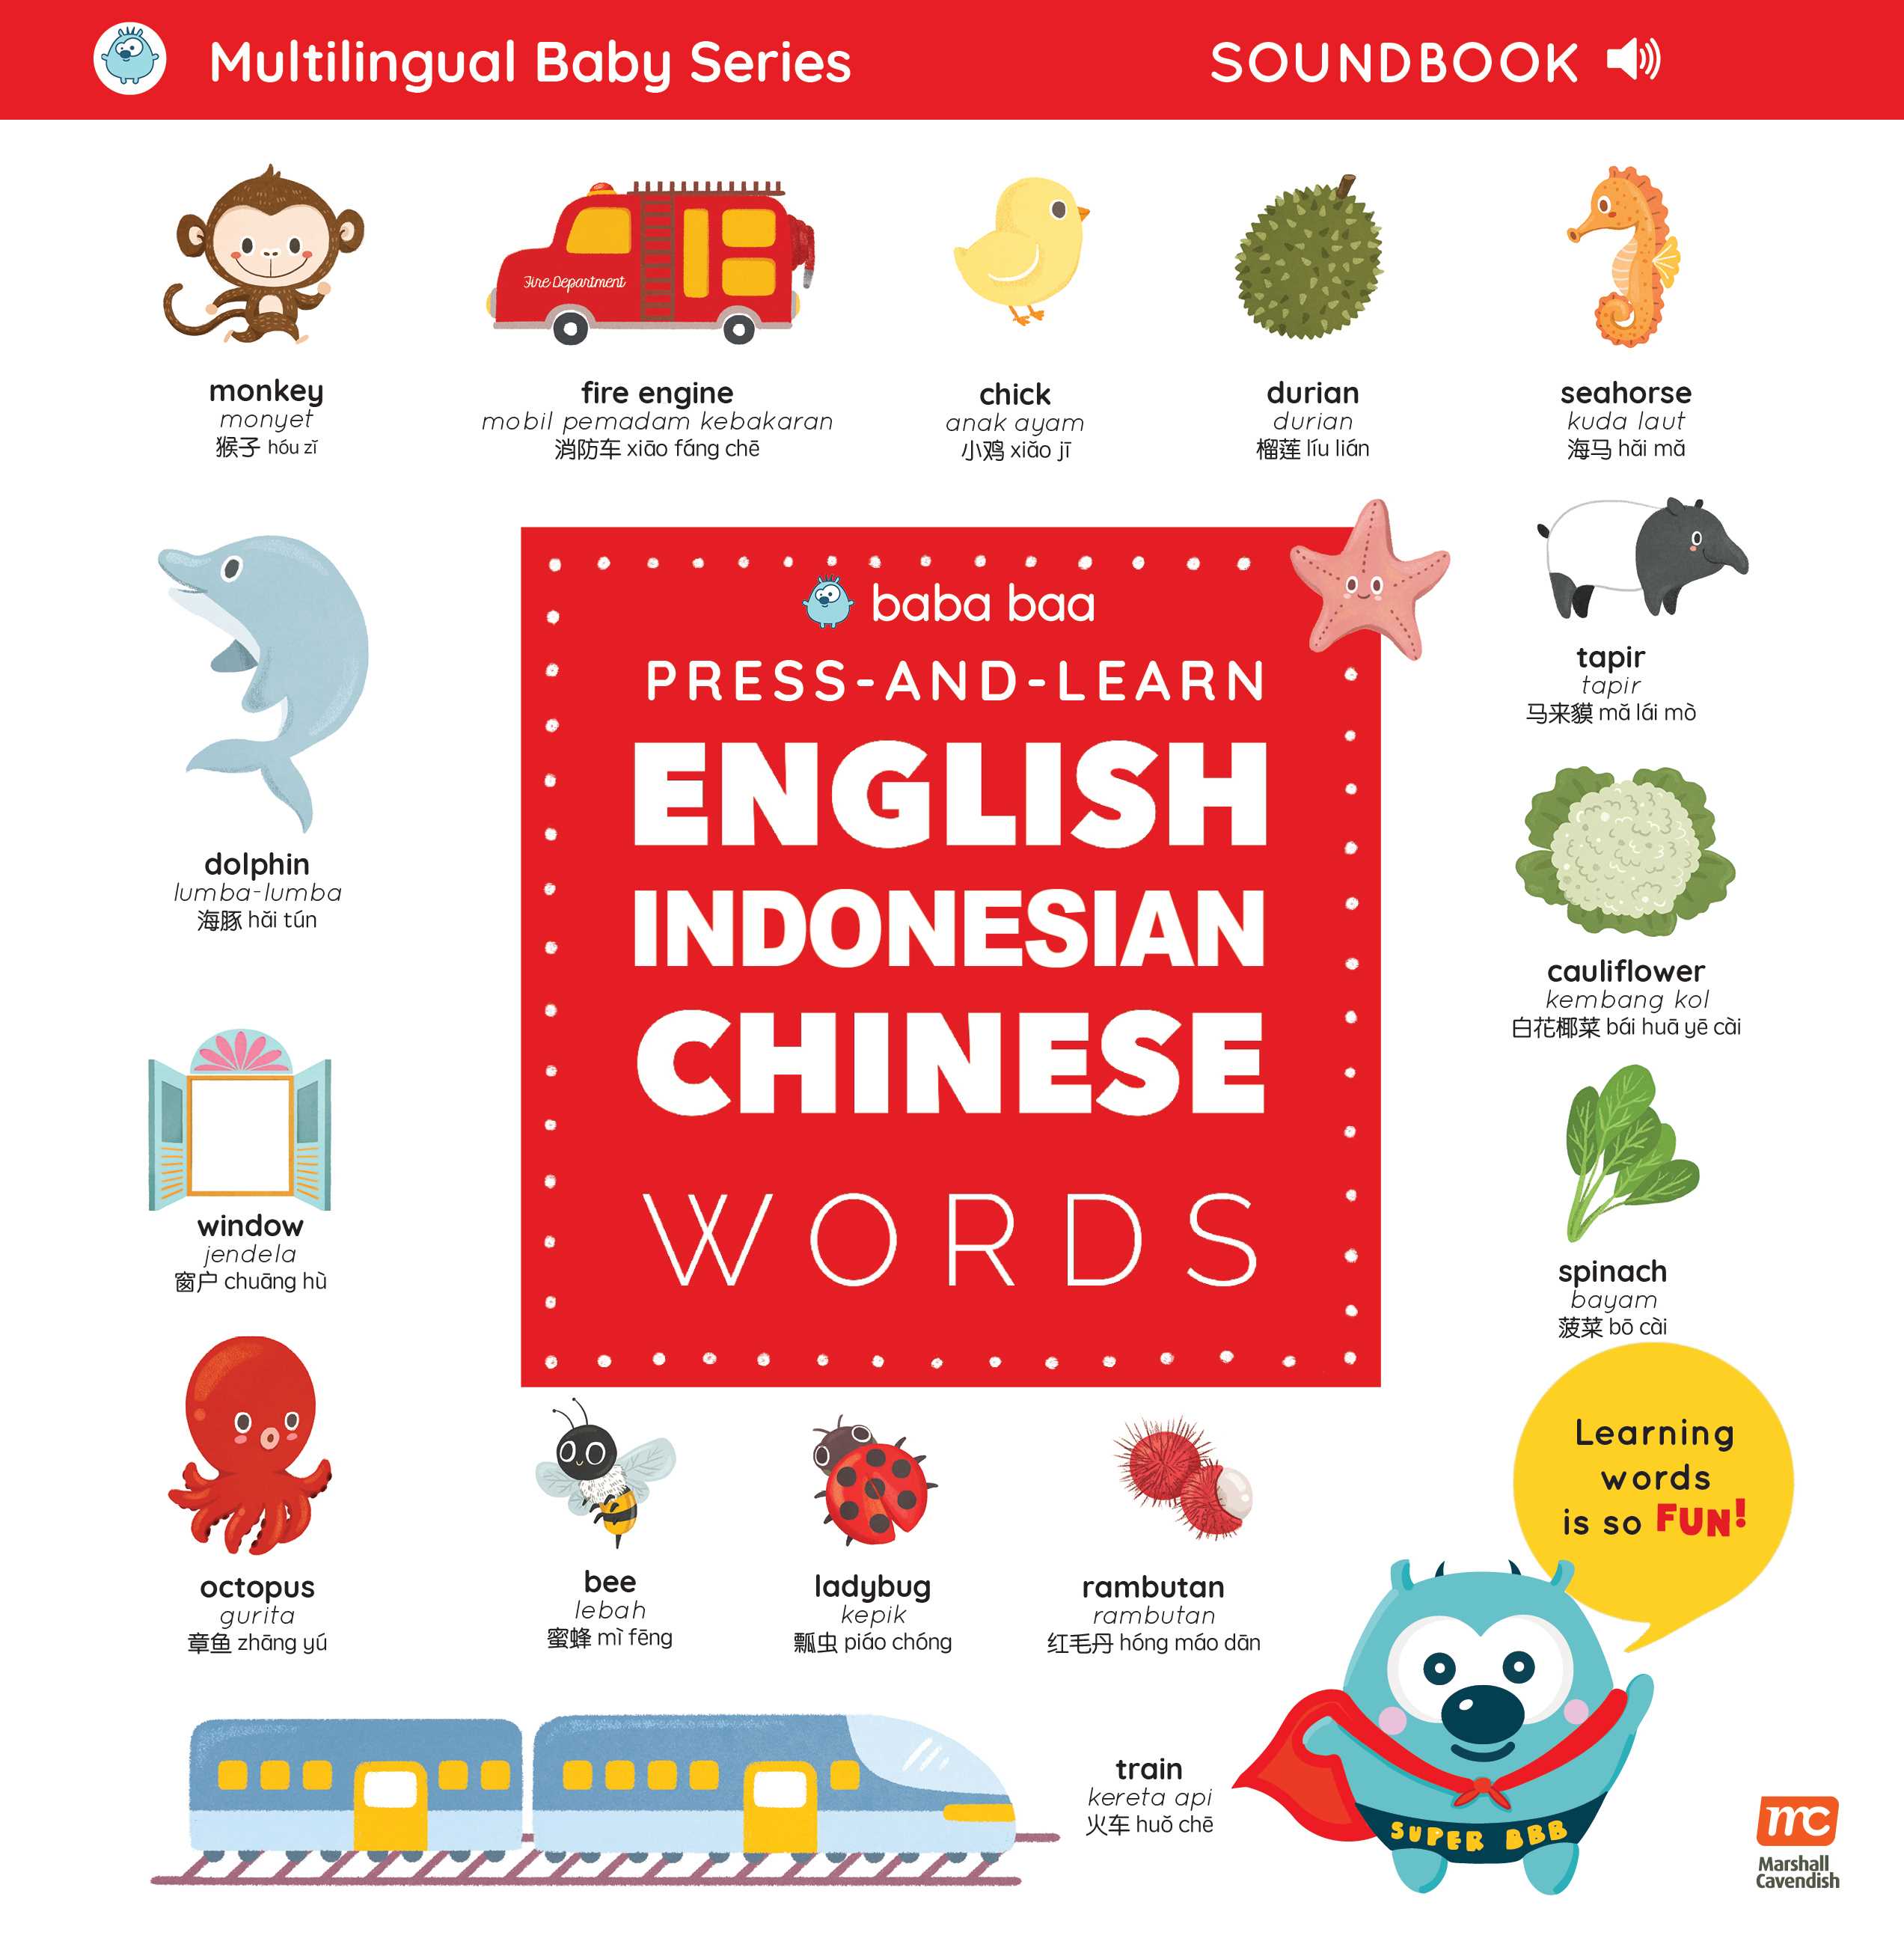 Press-and-Learn: English Indonesian Chinese Words Sound Book